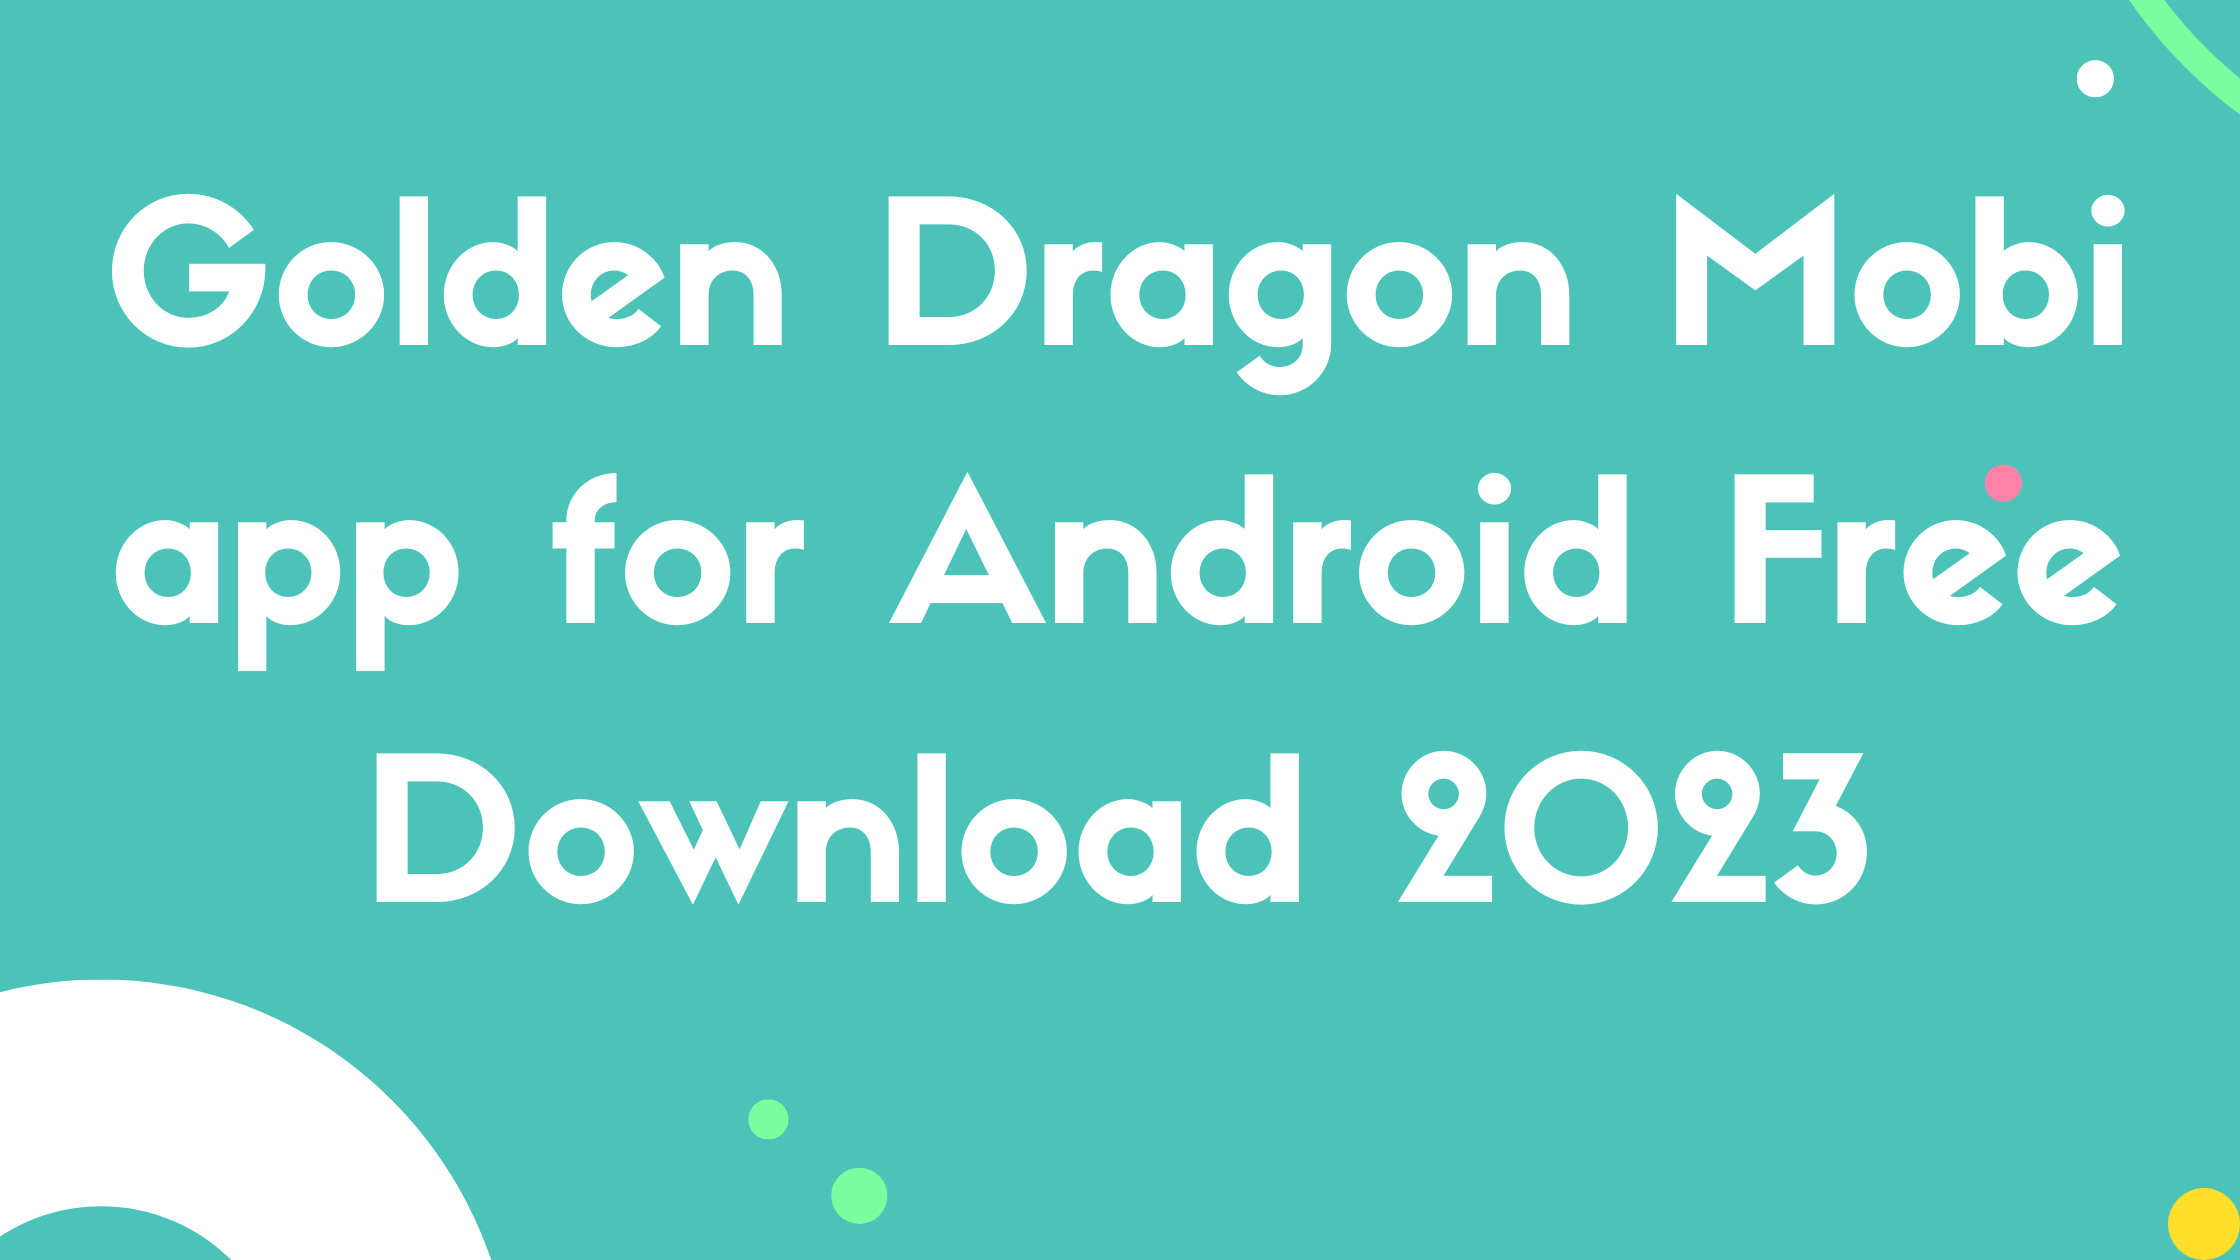 Golden Dragon Mobi app for Android Free Download 2023